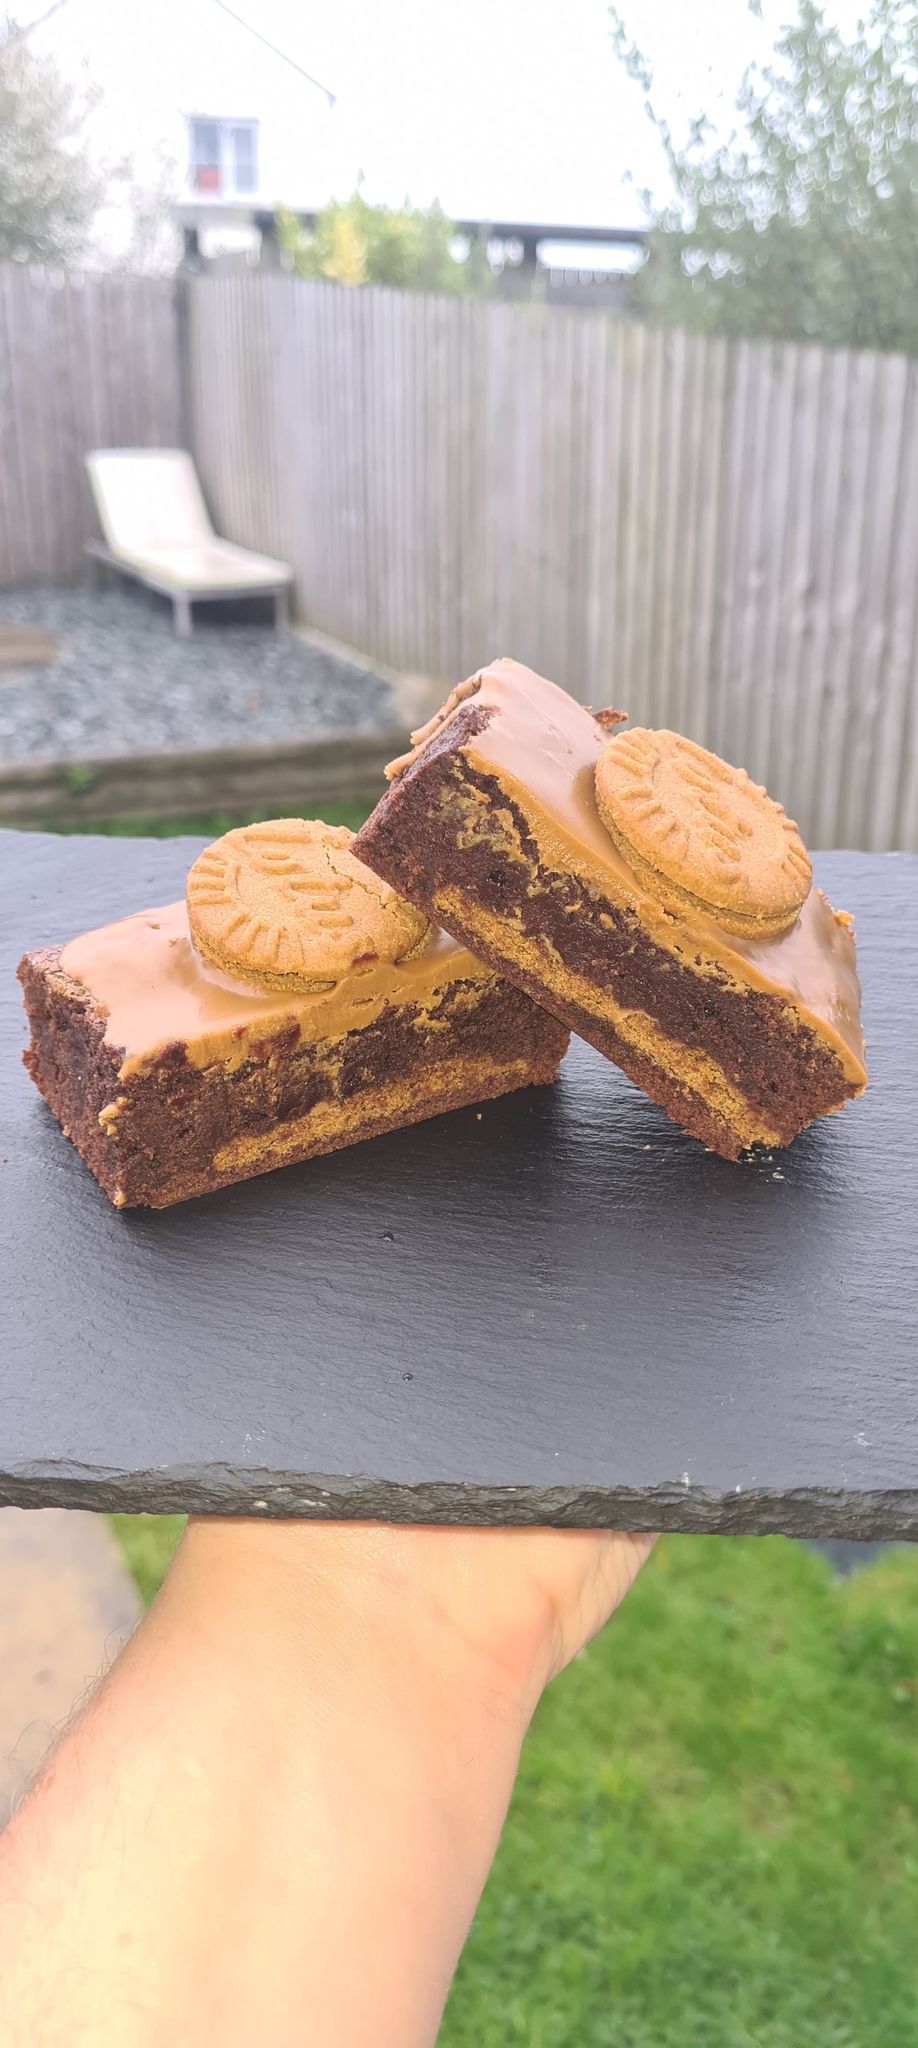 Biscoff brownie, arguably one of the greatest biscuits ever made topped on a delicious brownie!